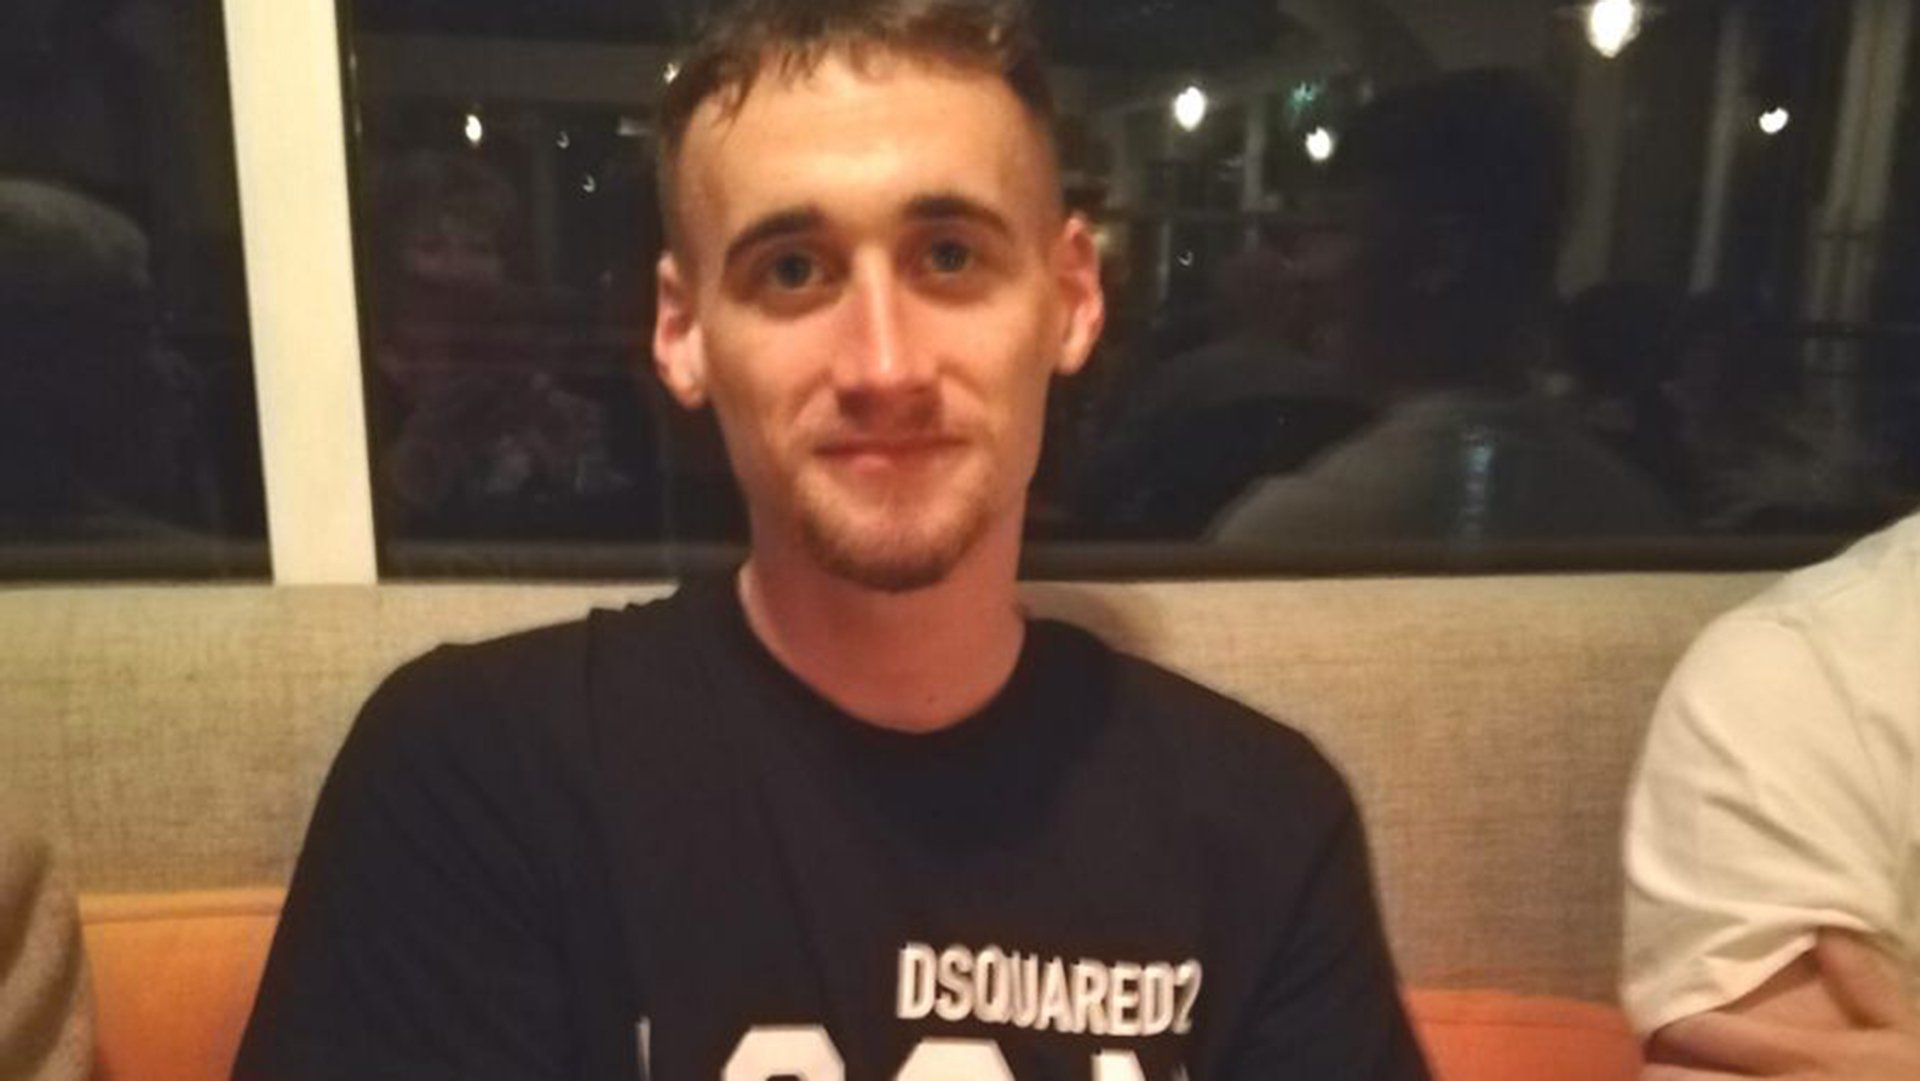 Lincoln City fans asked to help find man who mysteriously disappeared